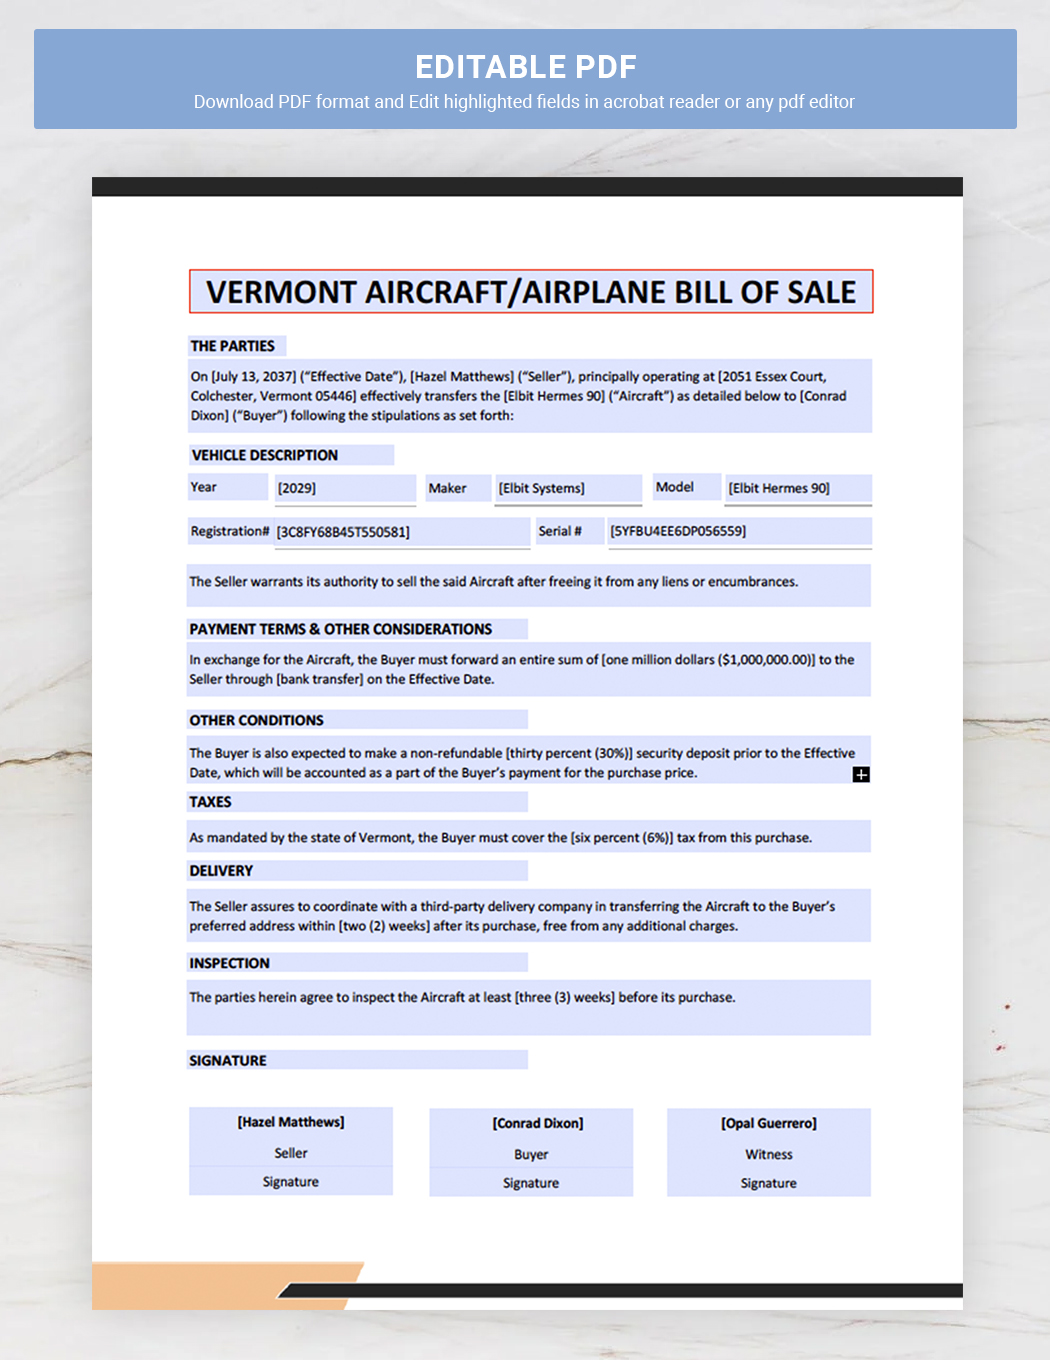 Vermont Aircraft / Airplane Bill of Sale Template